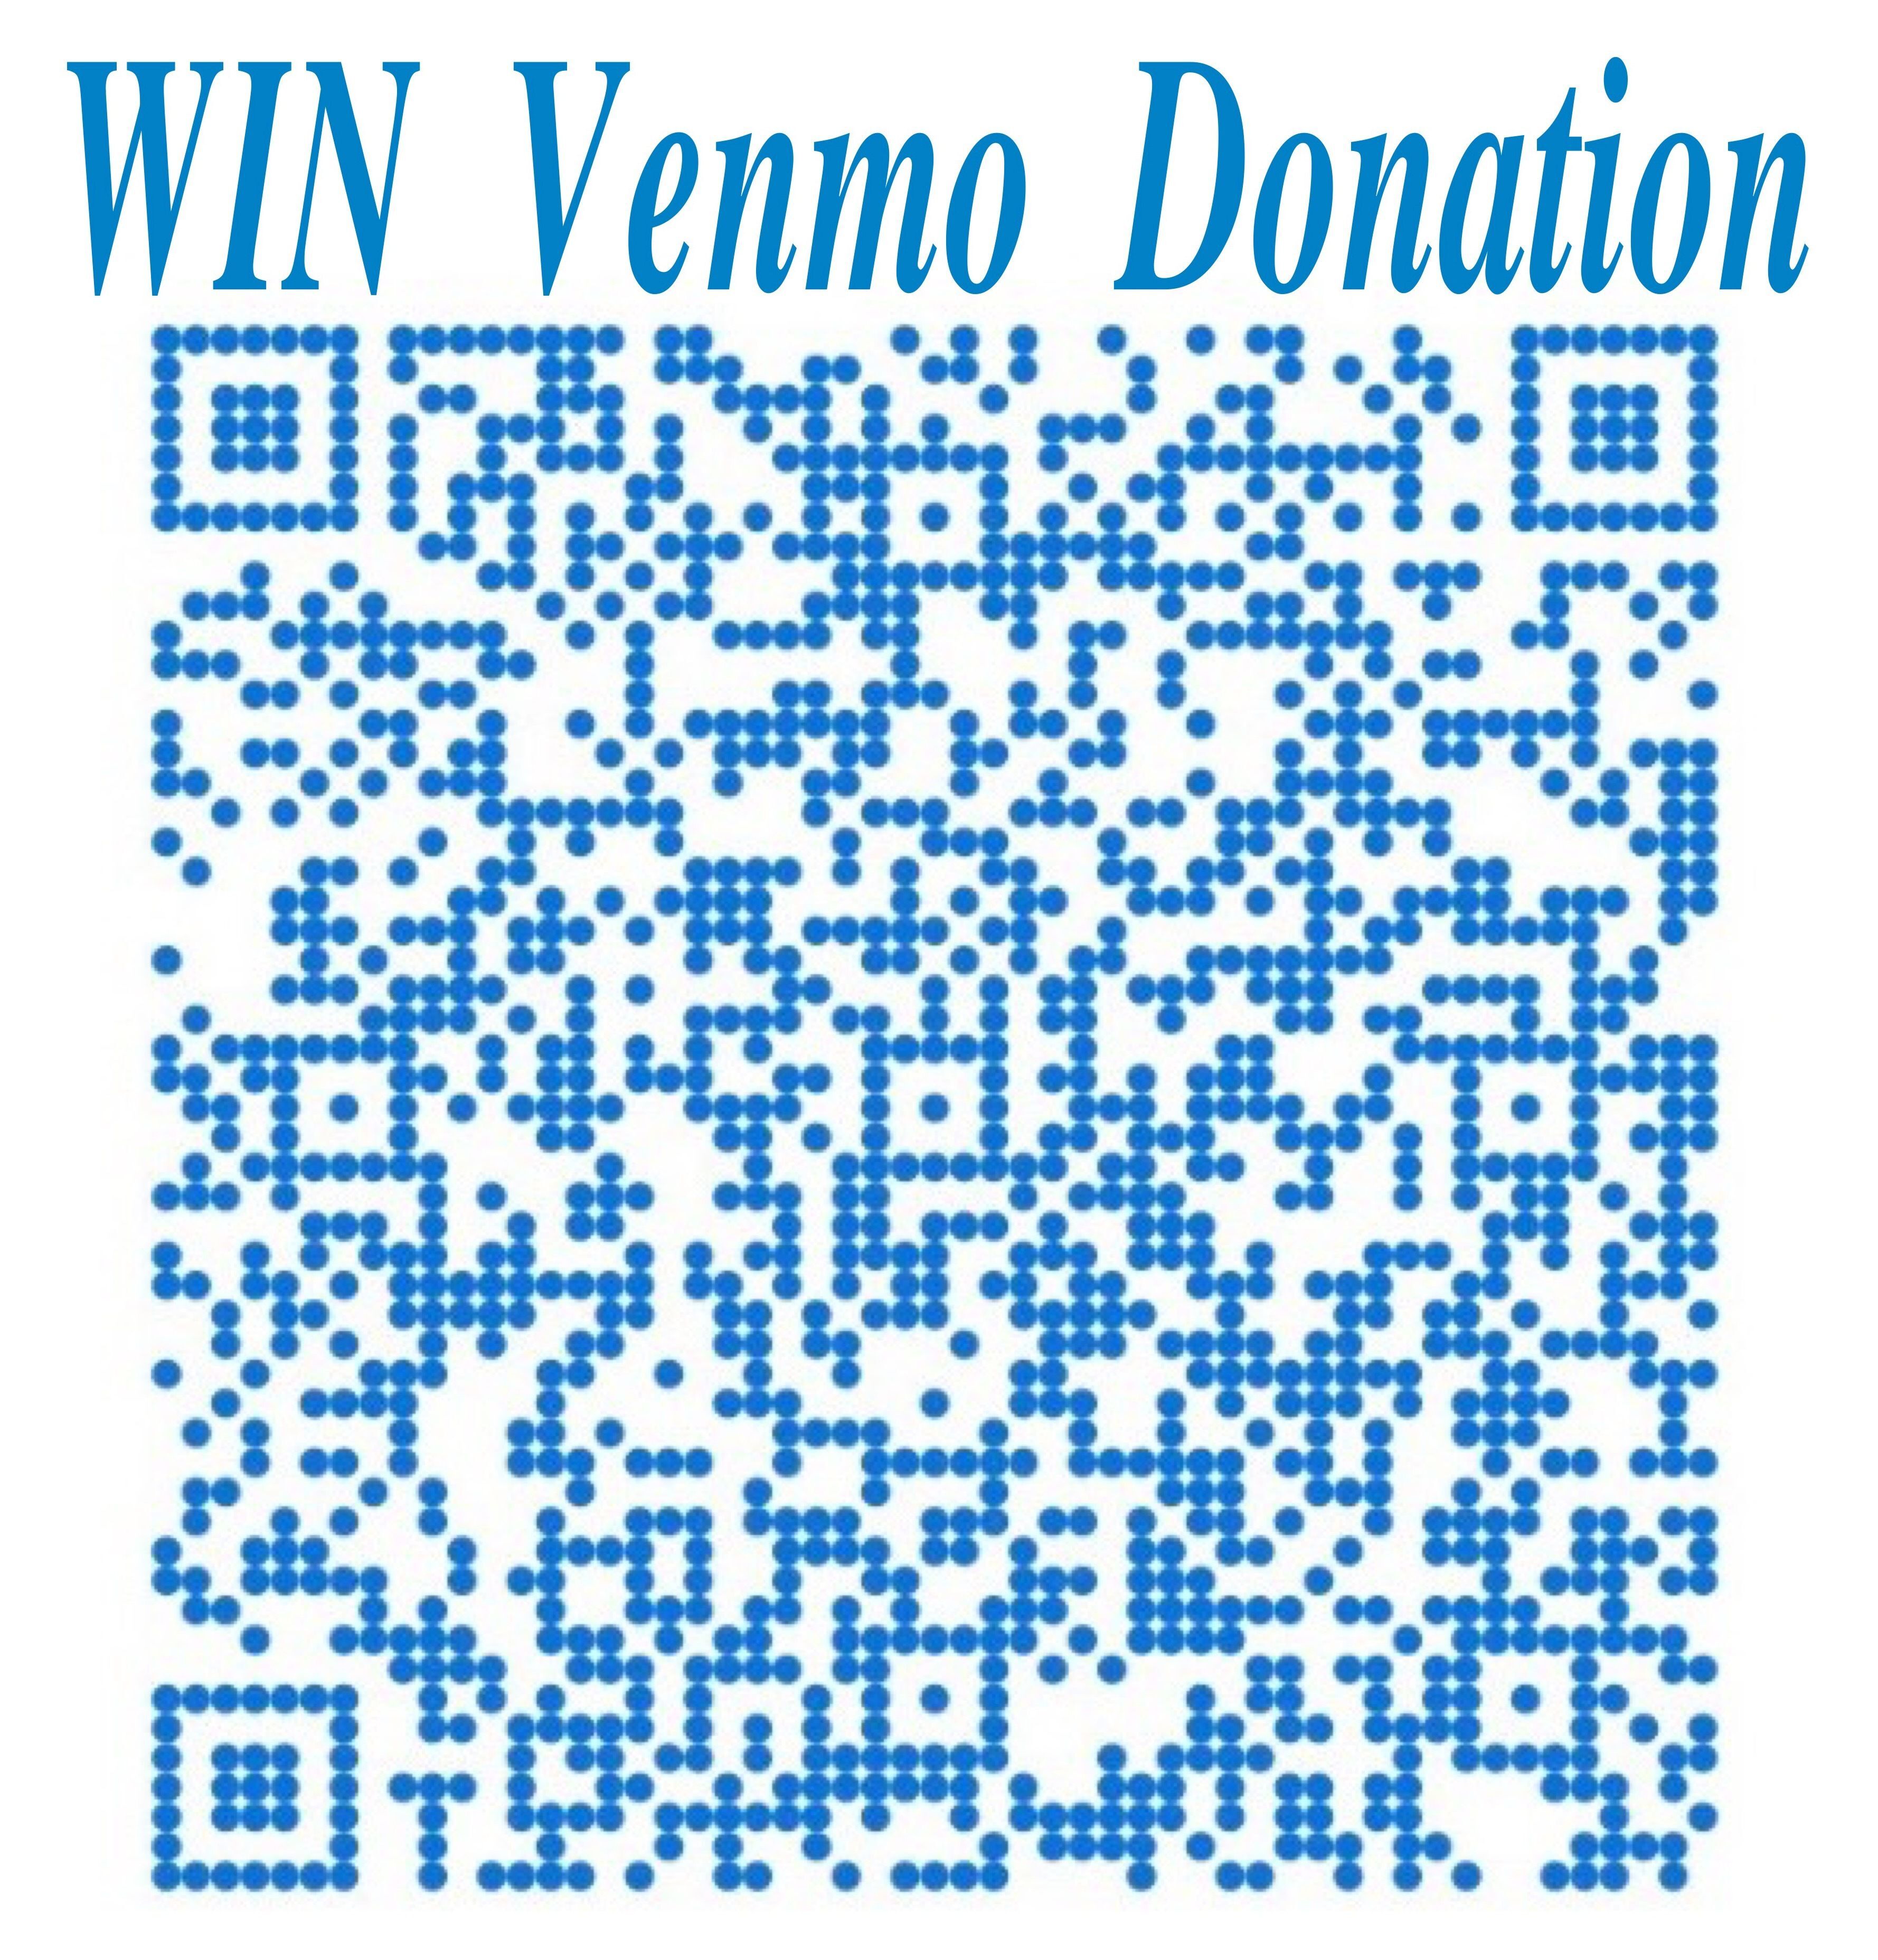 Scan with your phone's camera to give via Venmo